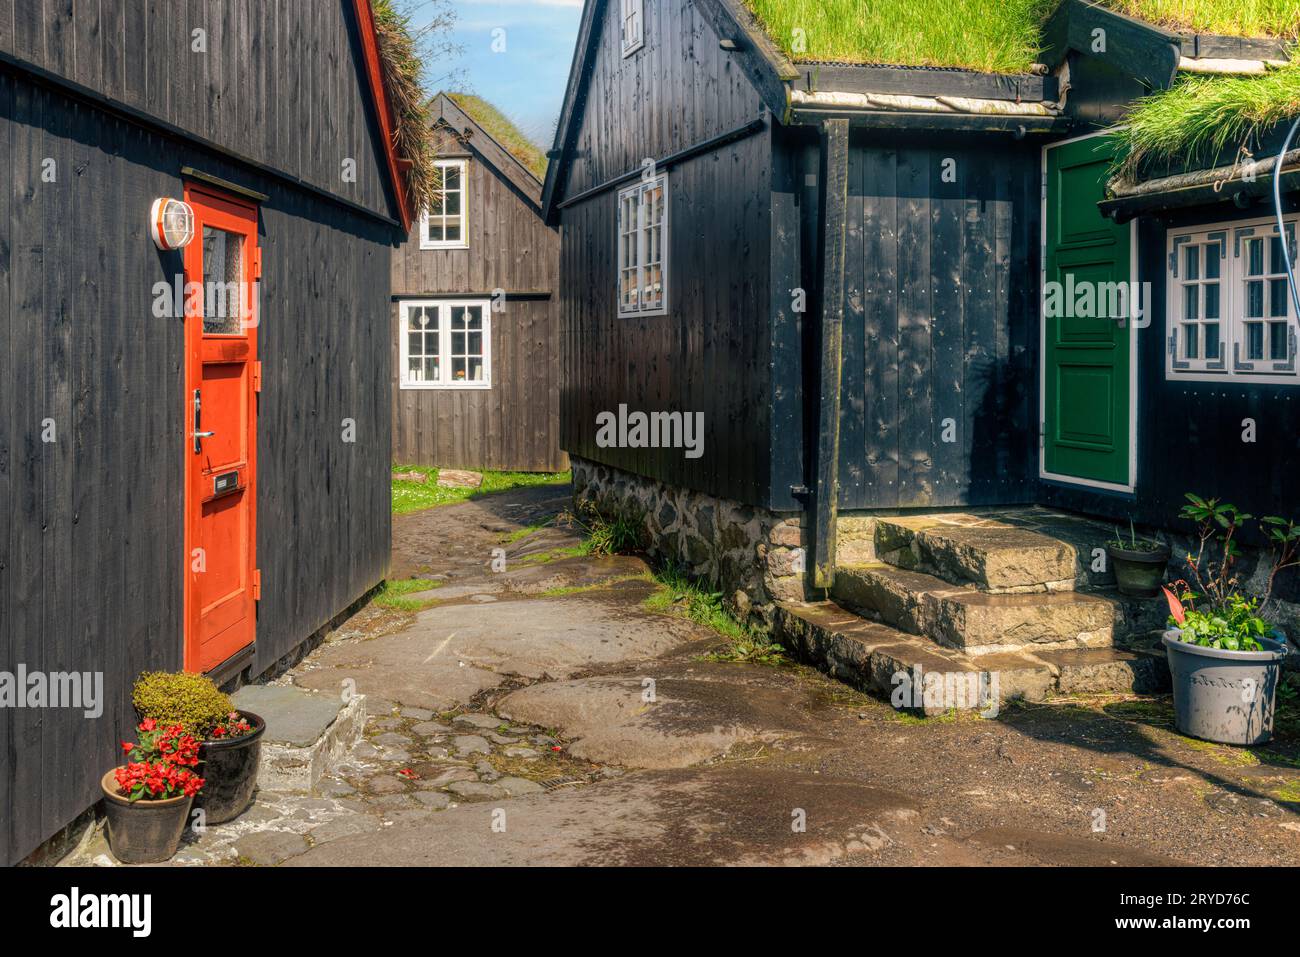 Torshavn and the parliament buildings in Tinganes in the Faroe Islands Stock Photo